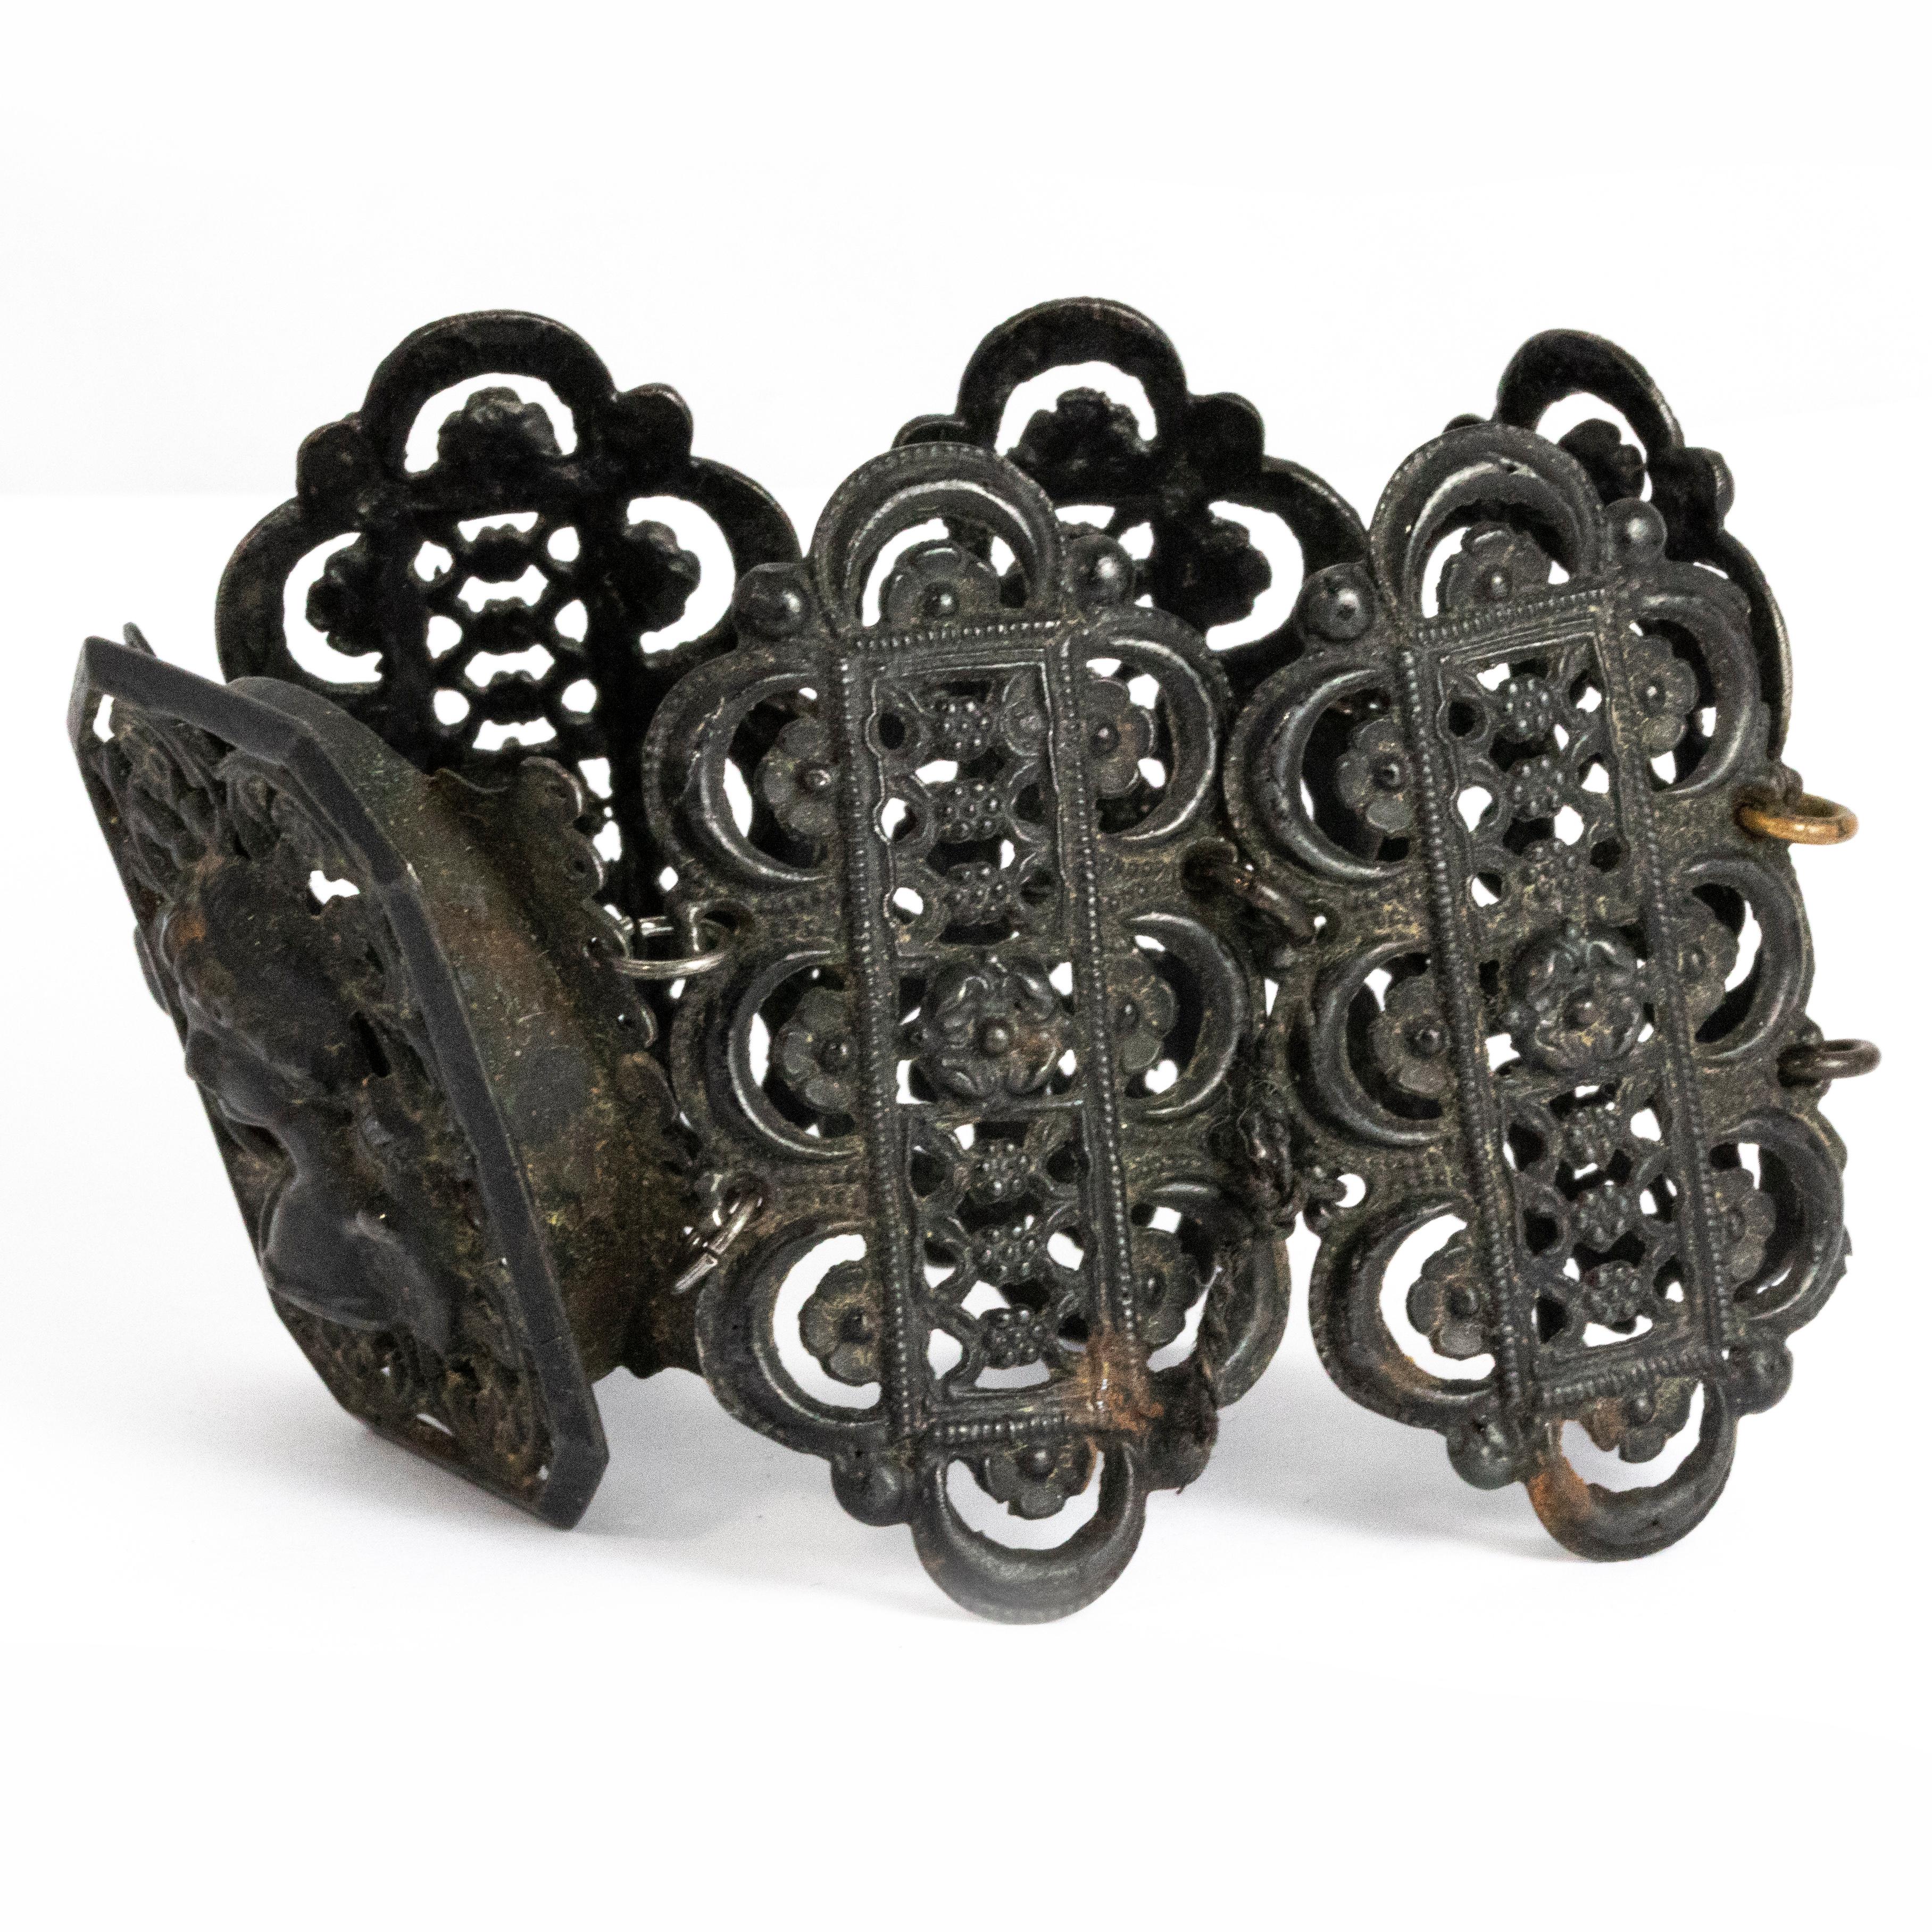 This cuff is a wonderful example of Victorian iron work. The bracelet is made up of 6 panels, one of which has the beautiful silhouette of a lady on it. The rest of the panels have delicate detail on them and all are connected by metal loops.